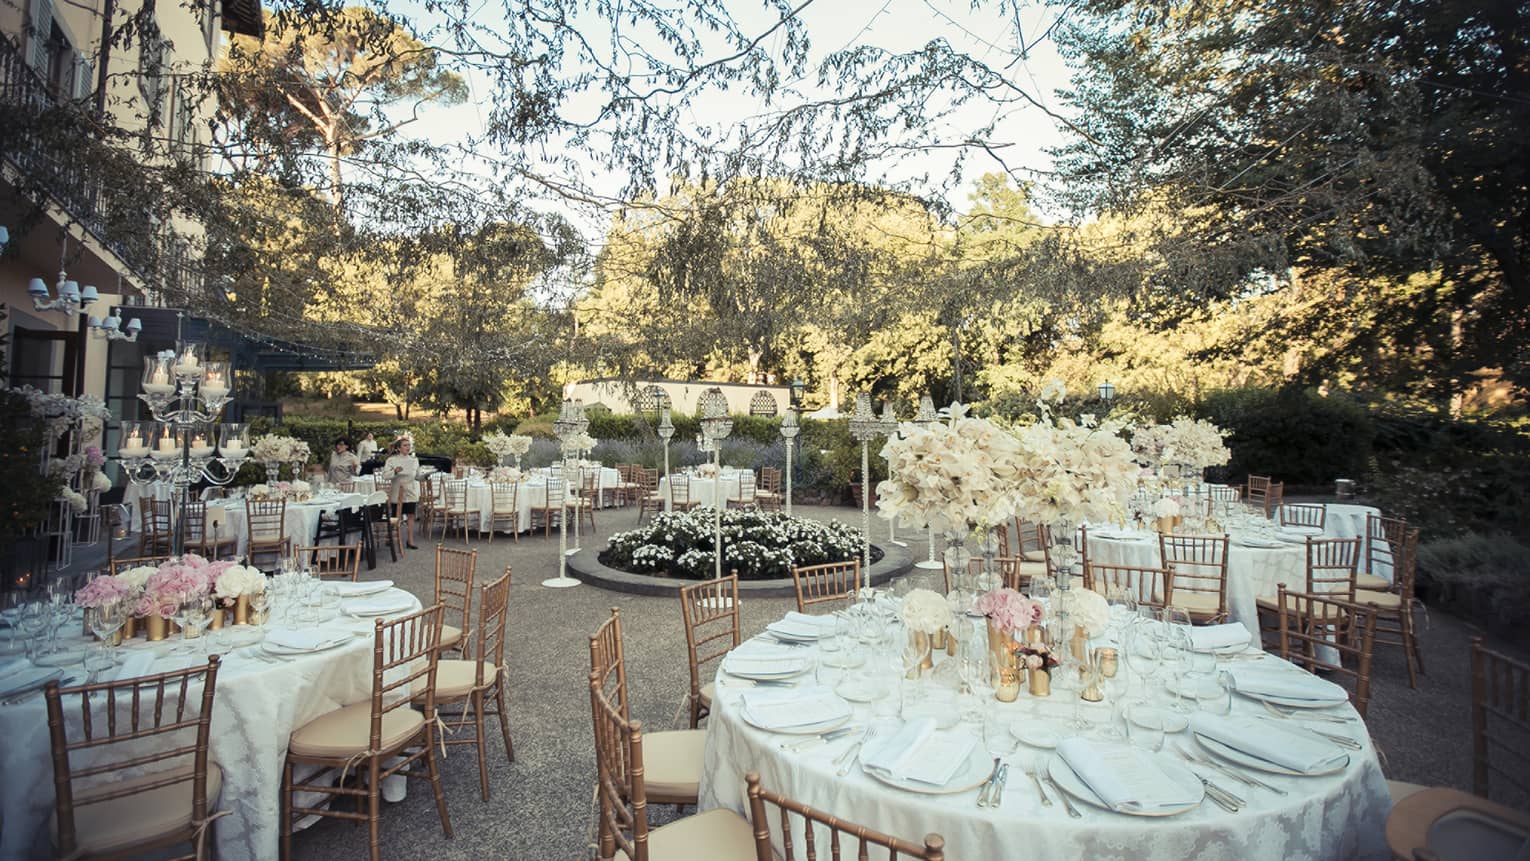 Circular tables are set with white porcelain dishes, silverware, pink and white florals in a courtyard surrounded with brush and sting lights